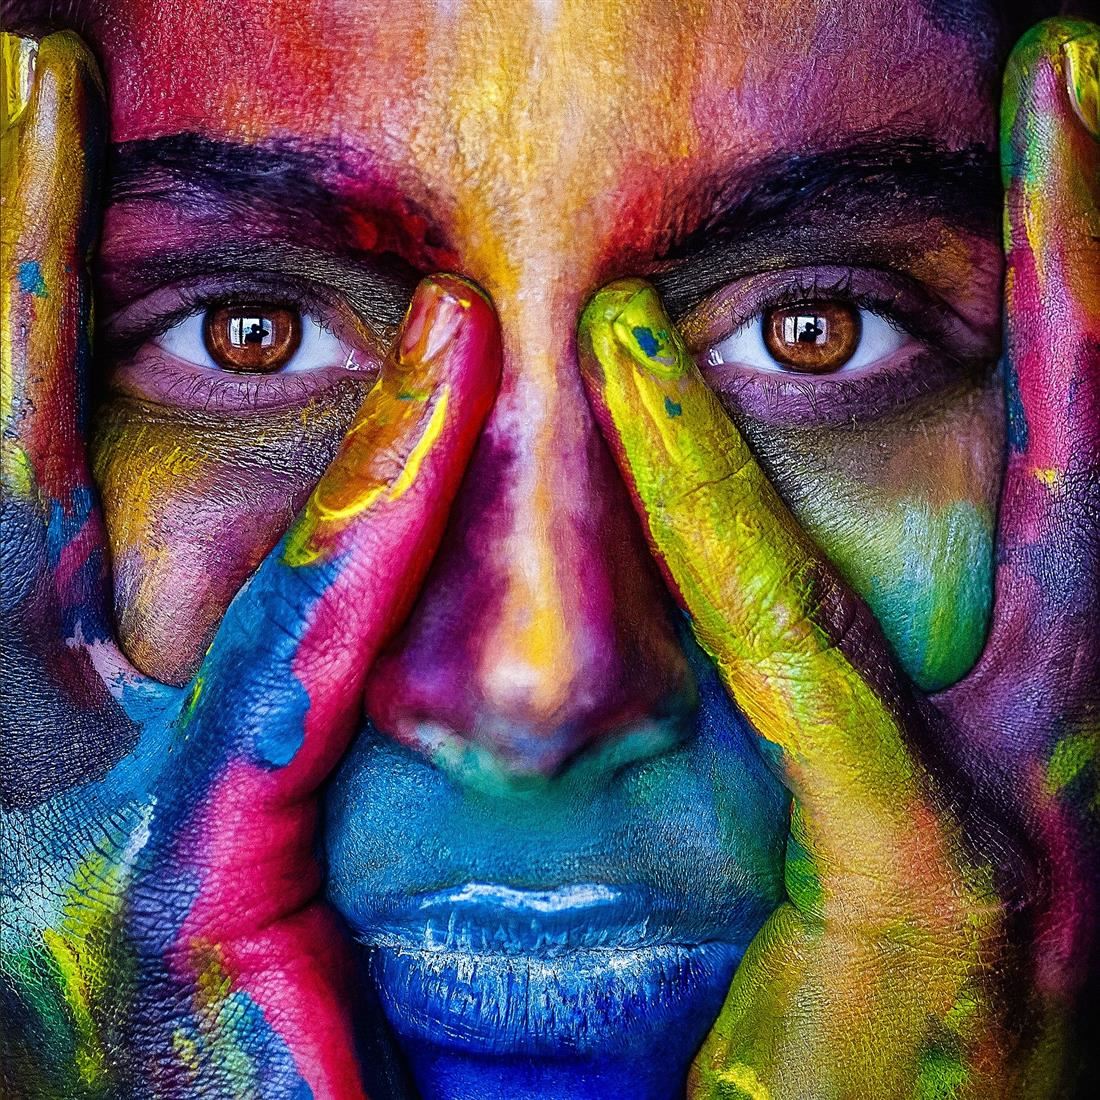 An artistic photo of a woman's face and hands painted many colors